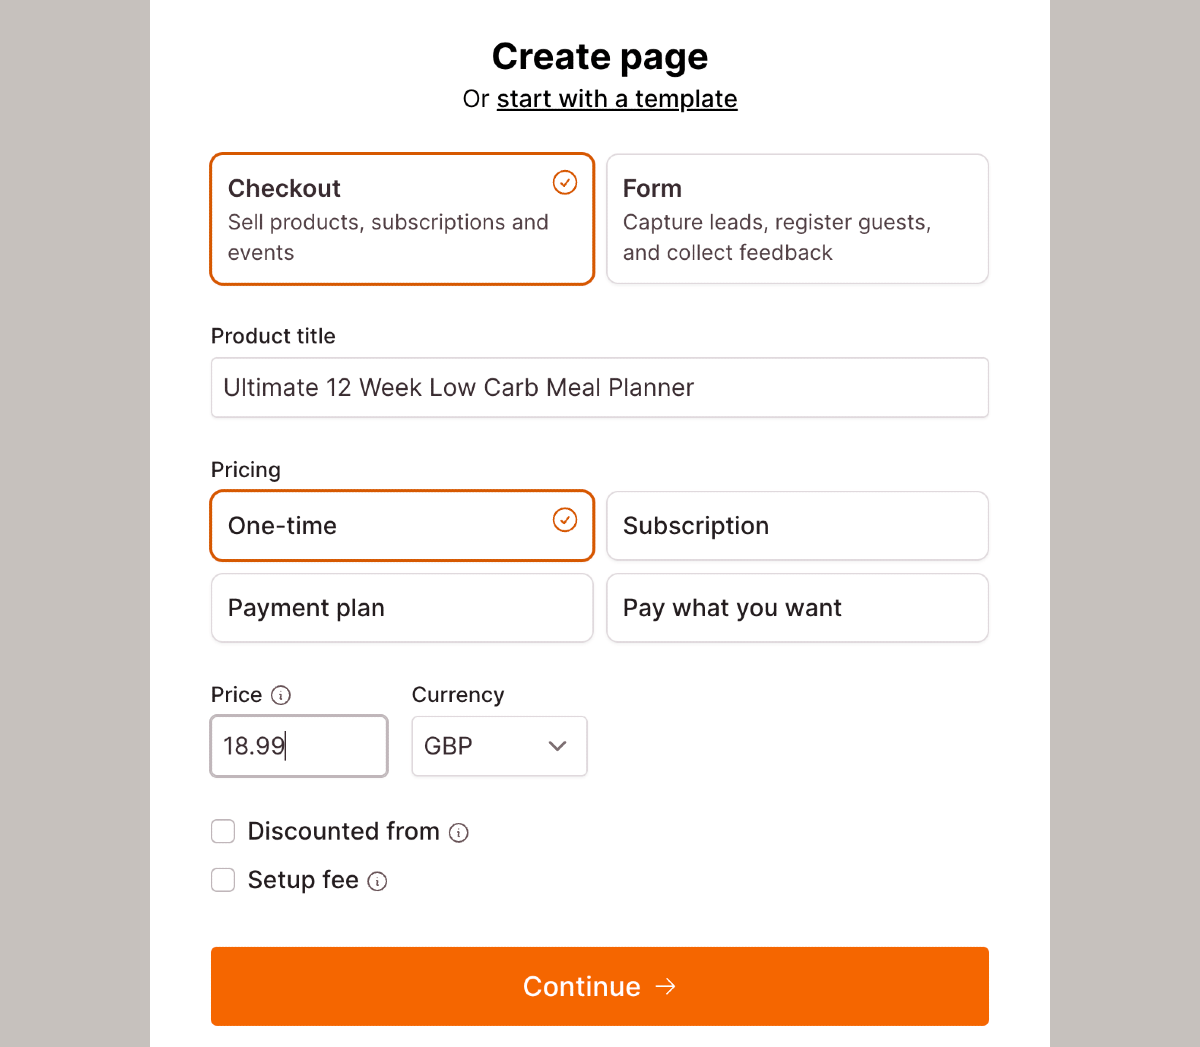 Checkout Page form enabling start creating a page